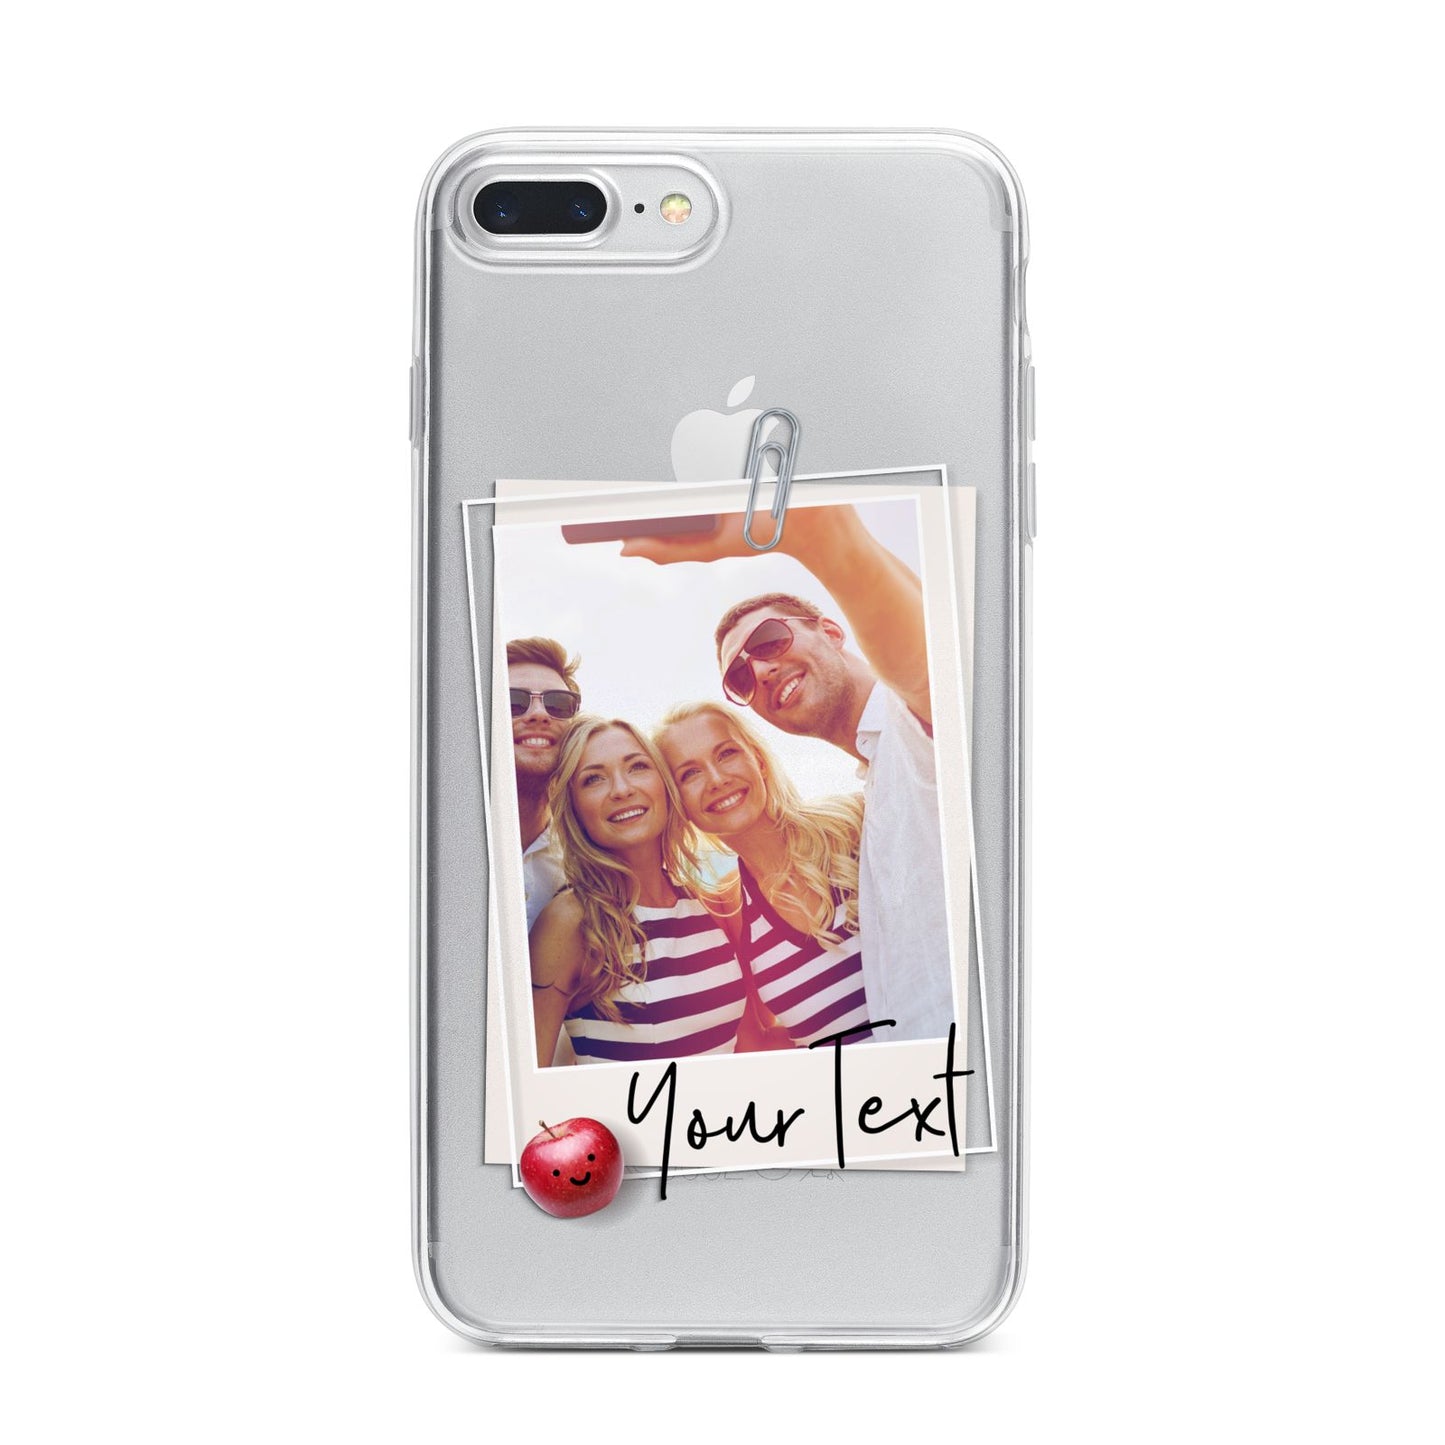 Photograph and Name iPhone 7 Plus Bumper Case on Silver iPhone